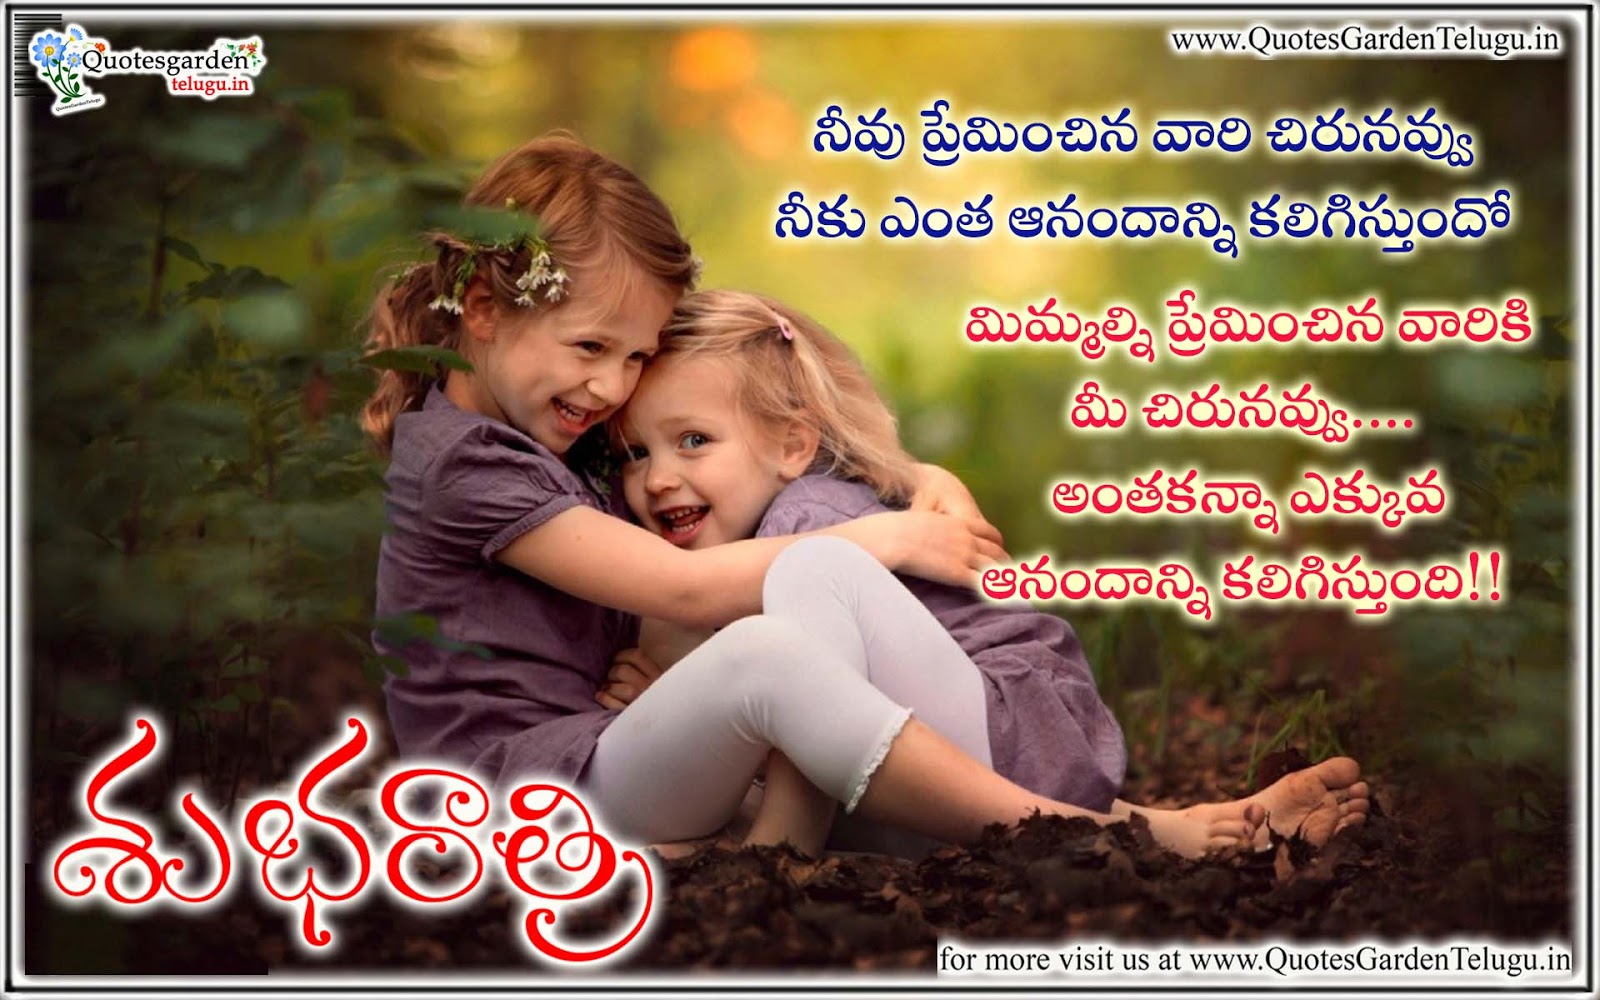 Nice Good night messages beautiful telugu quotations | QUOTES ...